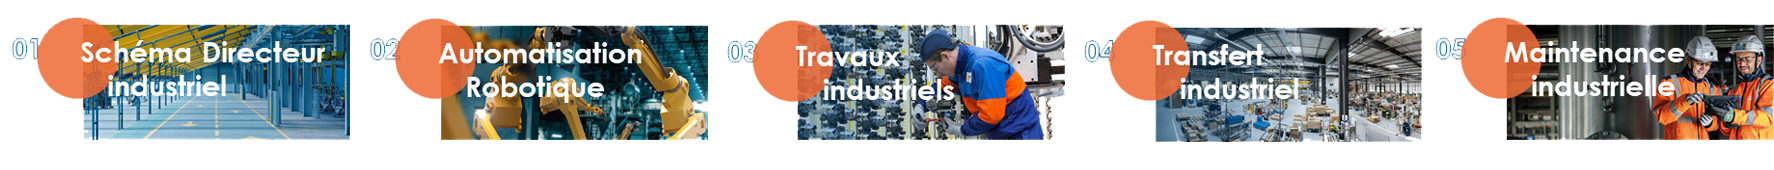 Offre globale industrie